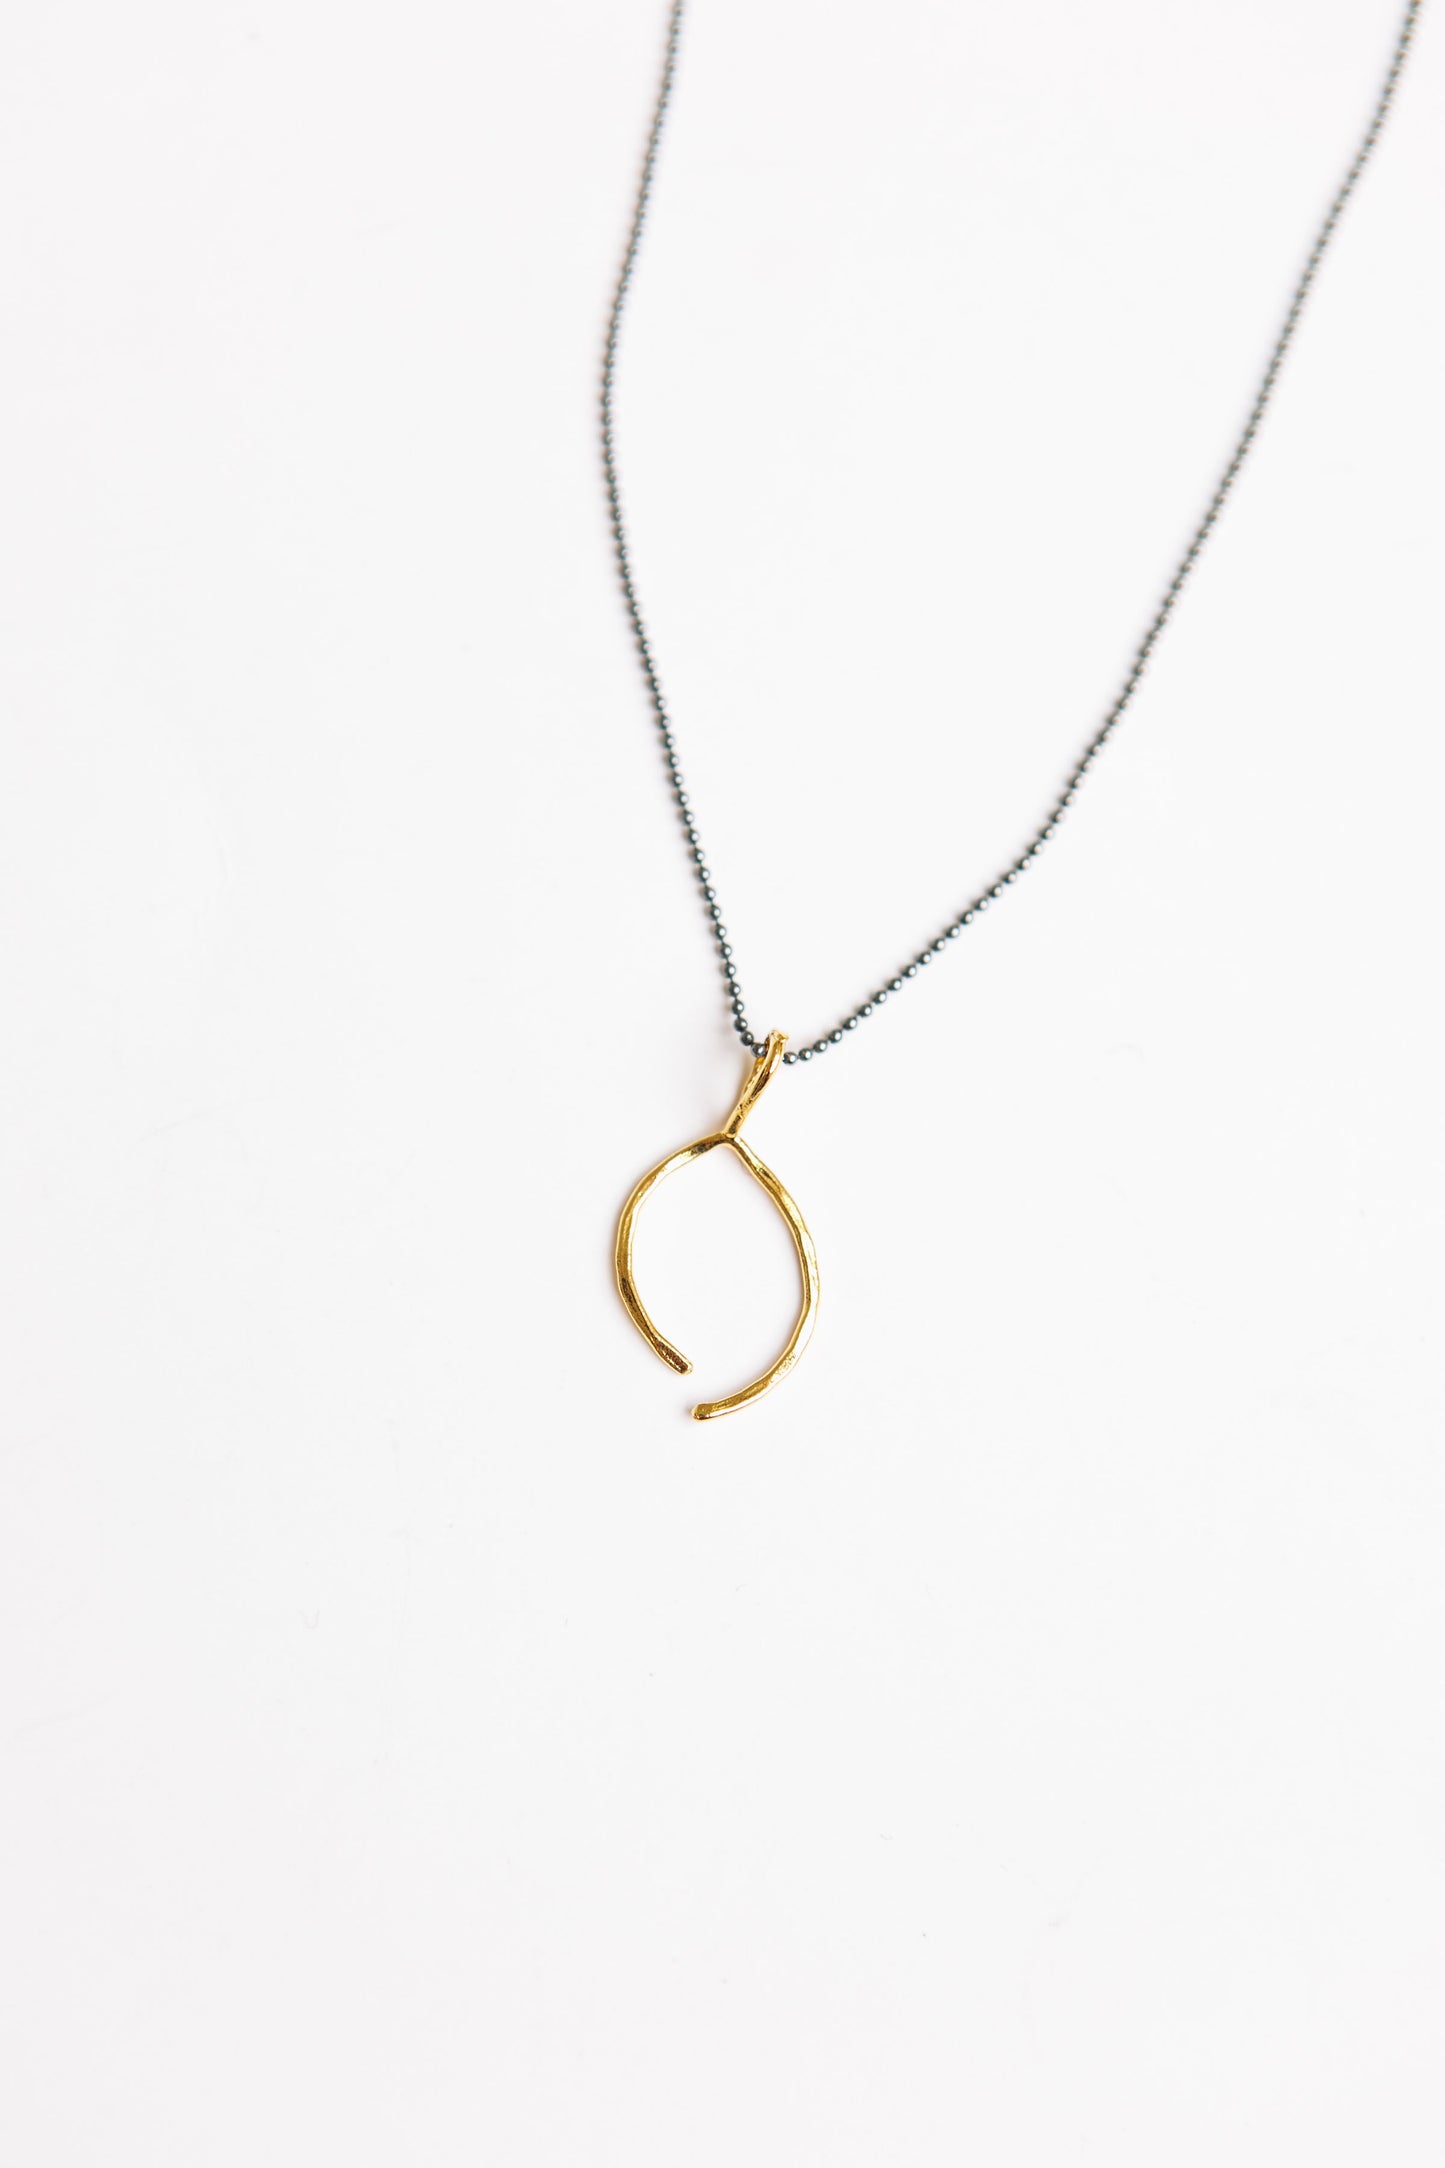 Wish - Sterling Silver Necklace with Wishbone Accent